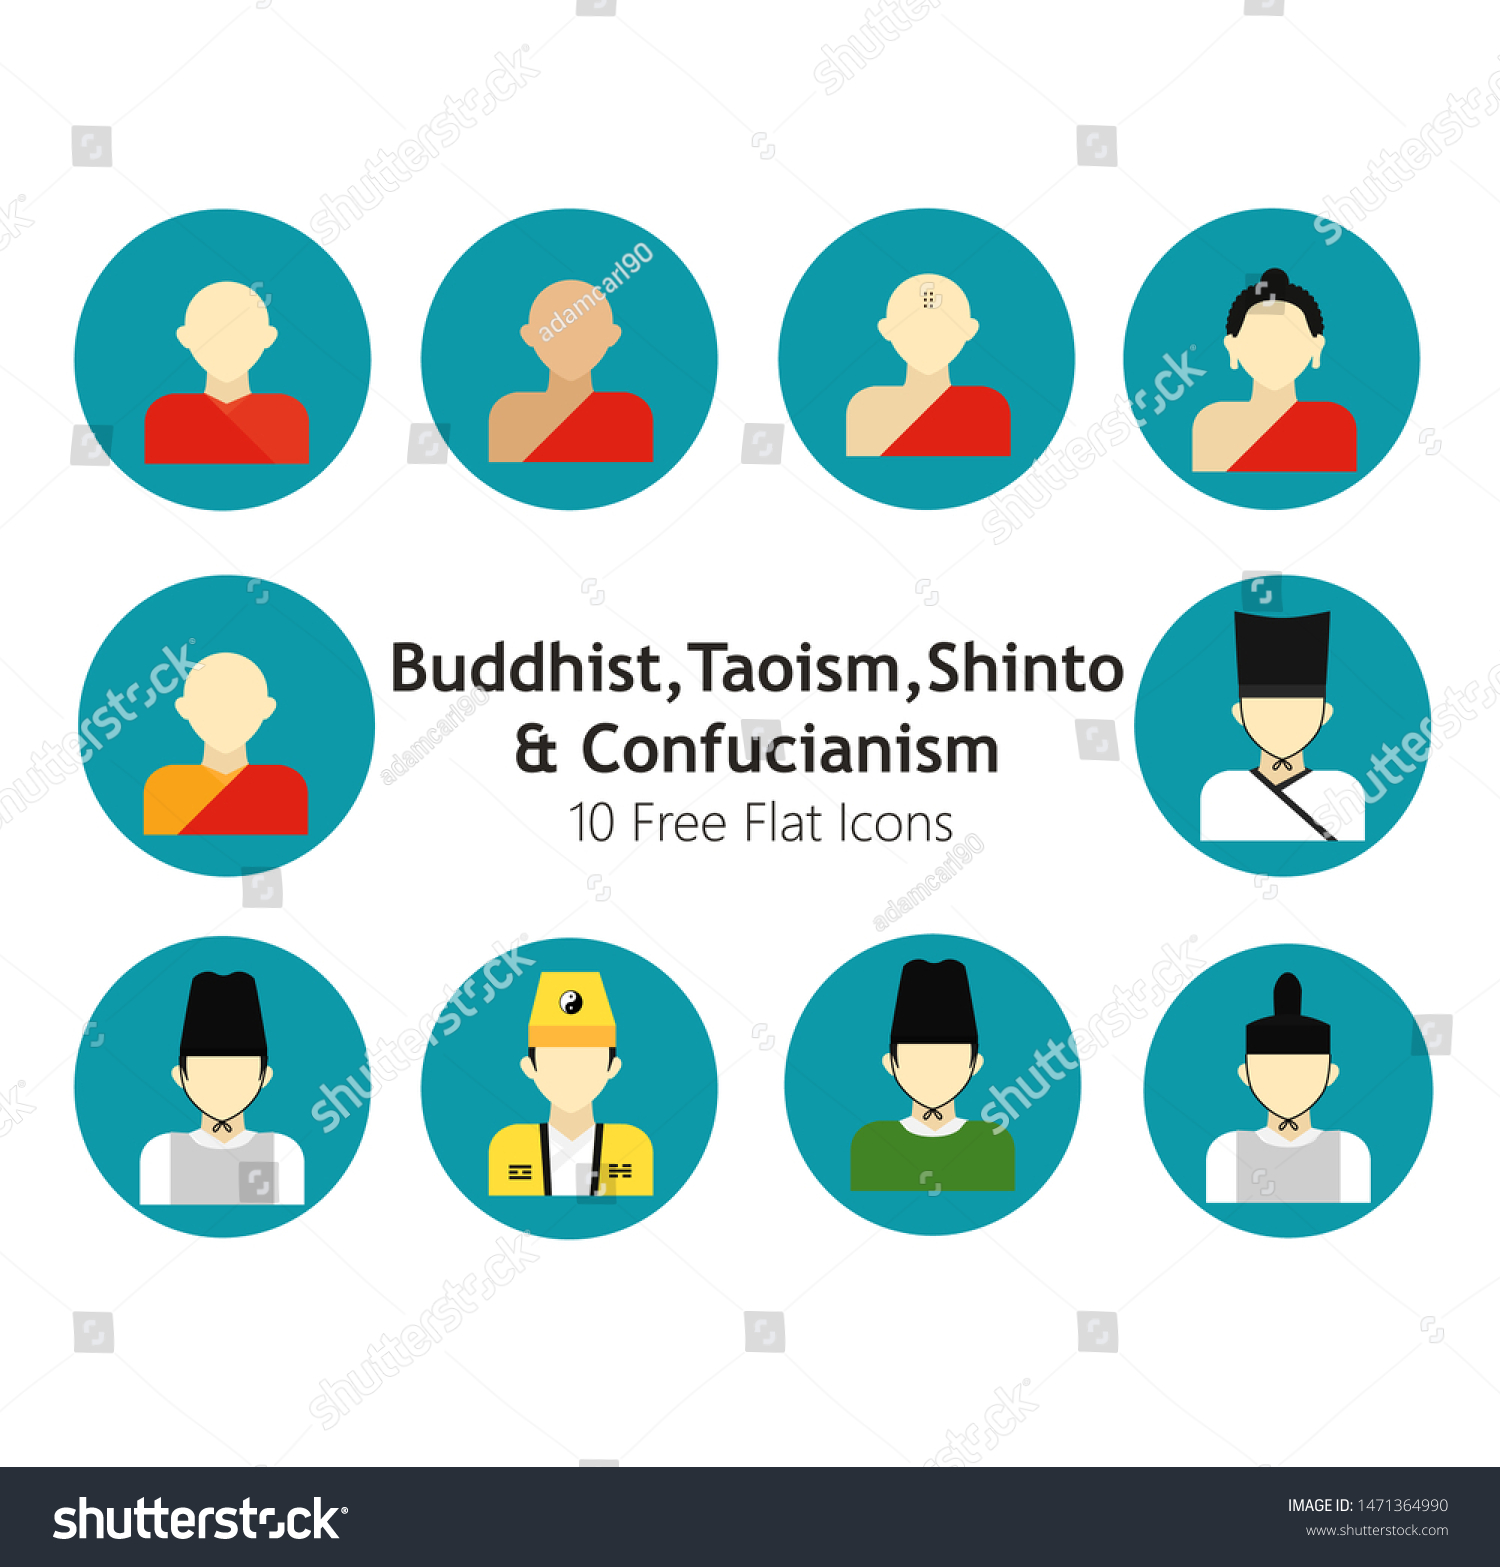 Buddhist Taoism Shinto Confucianism Icons Set Stock Vector